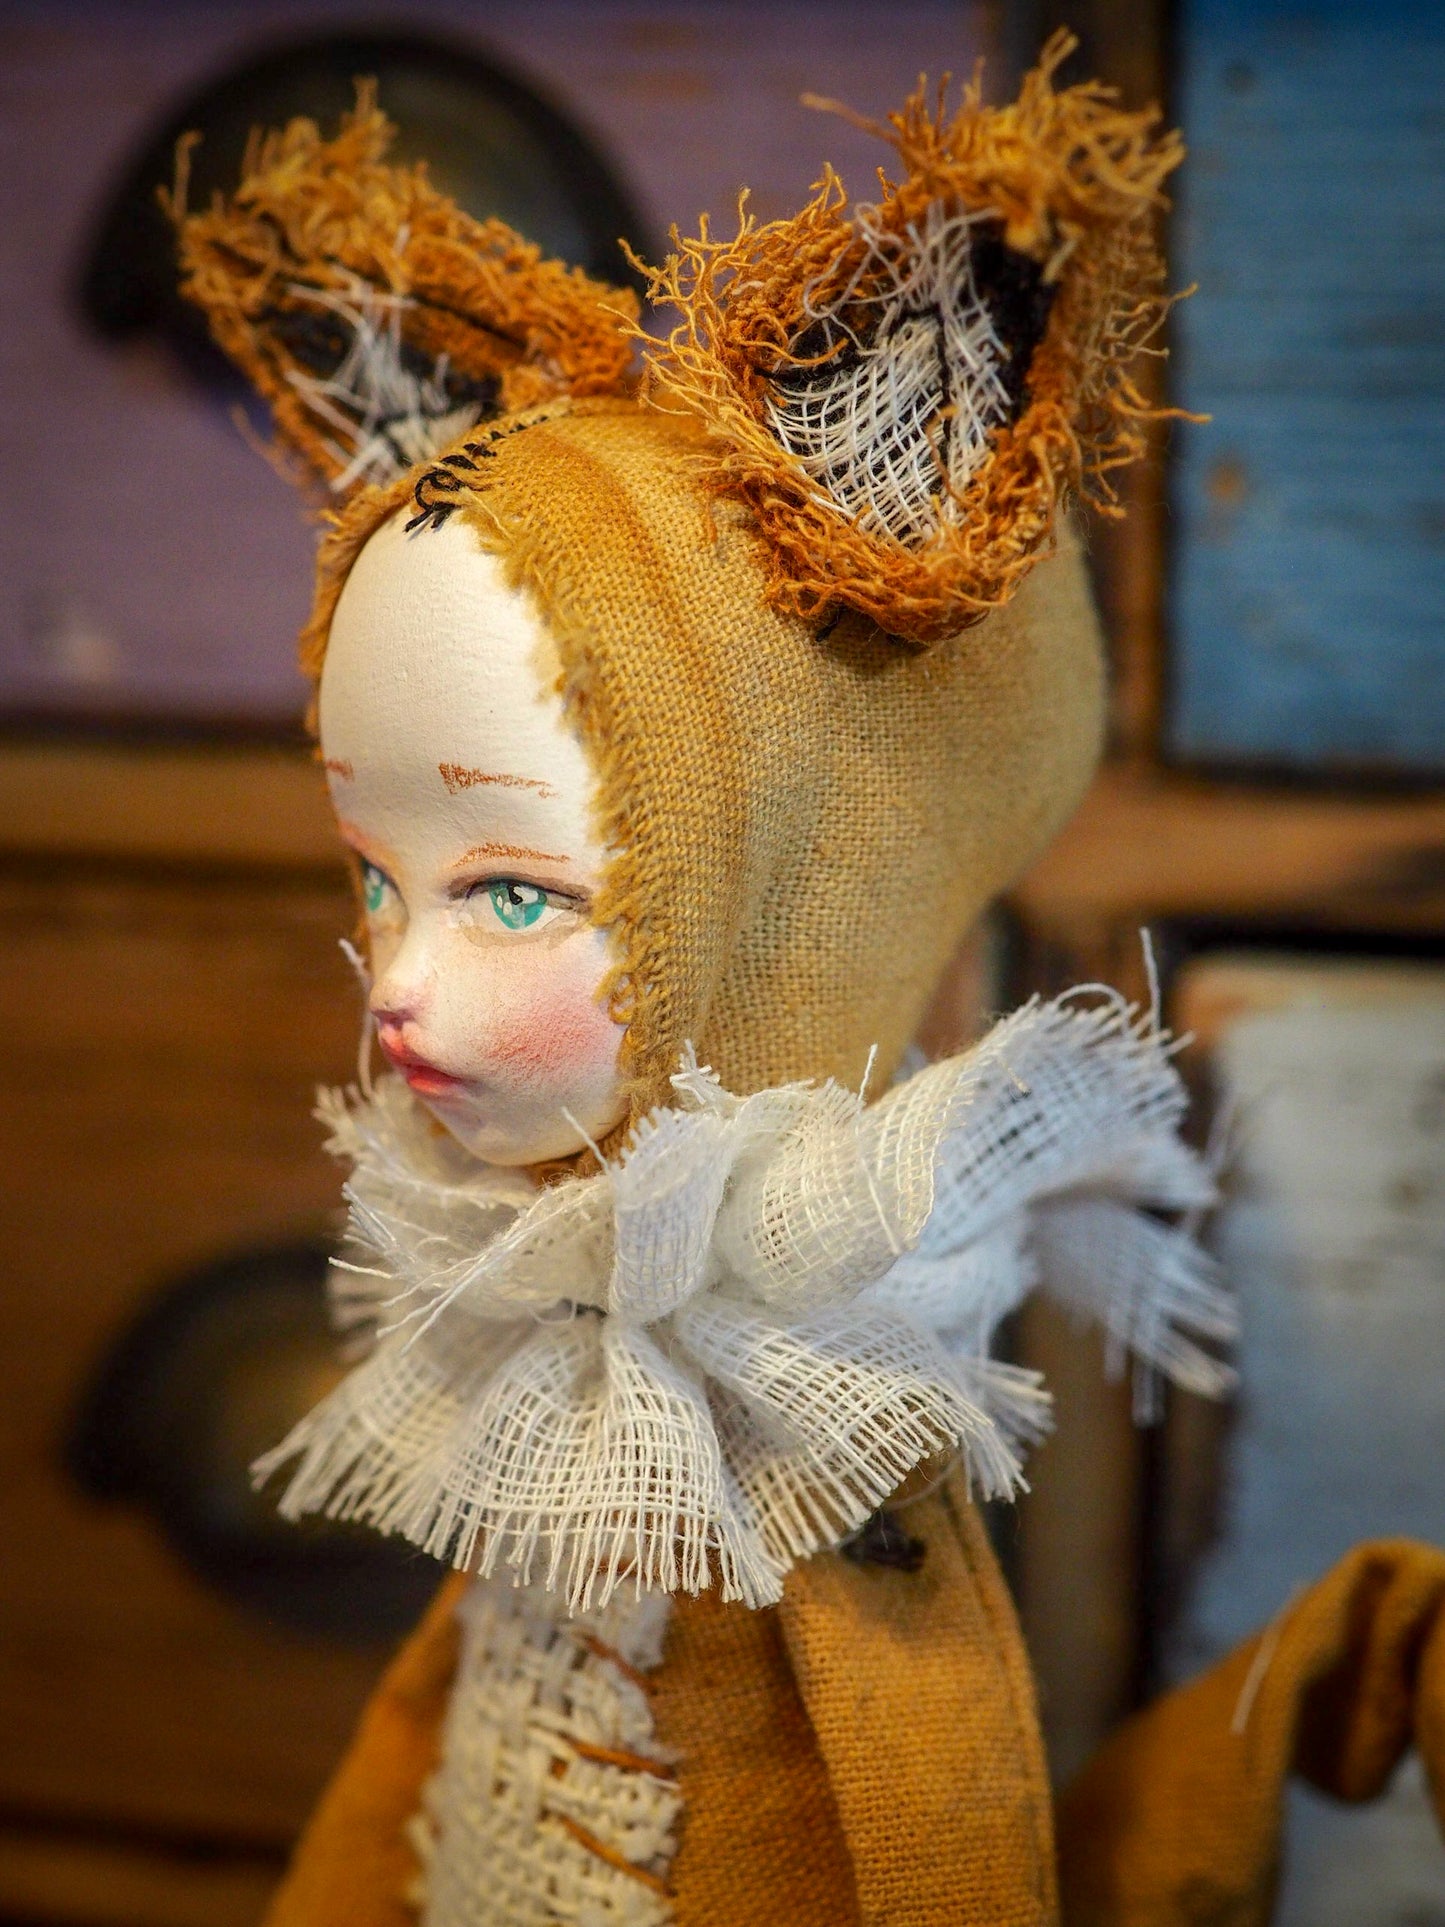 THE FOX - An original handmade doll by Danita Art, made with original patterns, organic fabric dyed using only natural ingredients like avocado peels, walnuts and marigolds. Each mini art doll in this toy collection is a mini work of huggable fabric art to be treasured by any collector of Danita's melancholic and fantastic work.